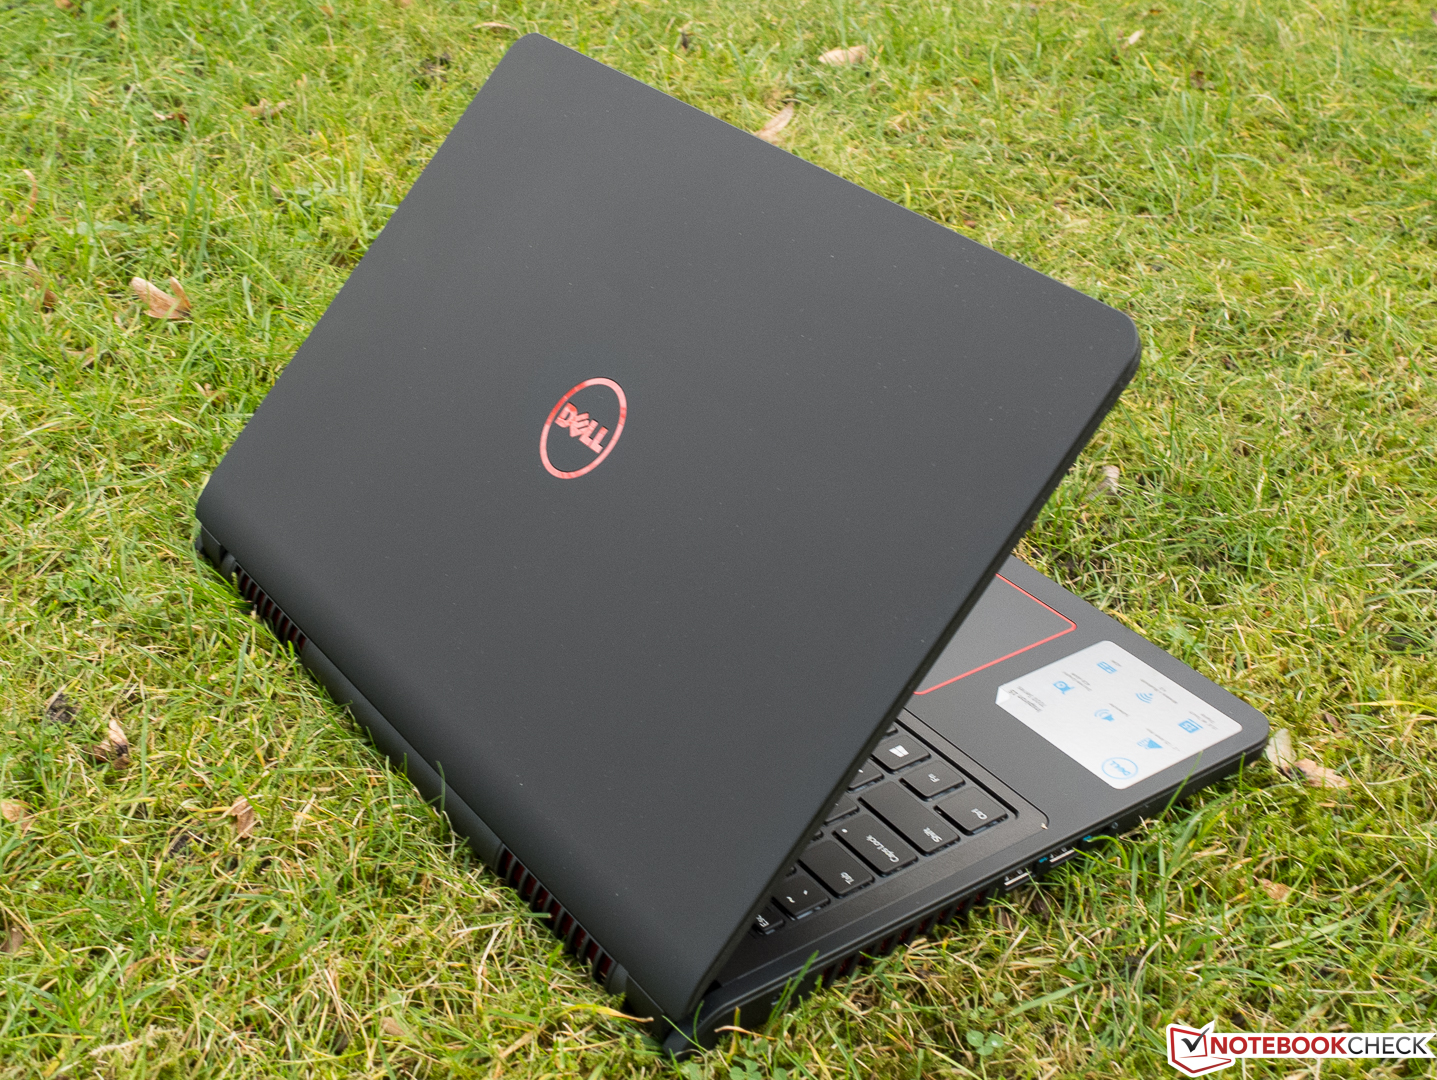 Dell Inspiron 15 7559 Notebook Review - NotebookCheck.net Reviews